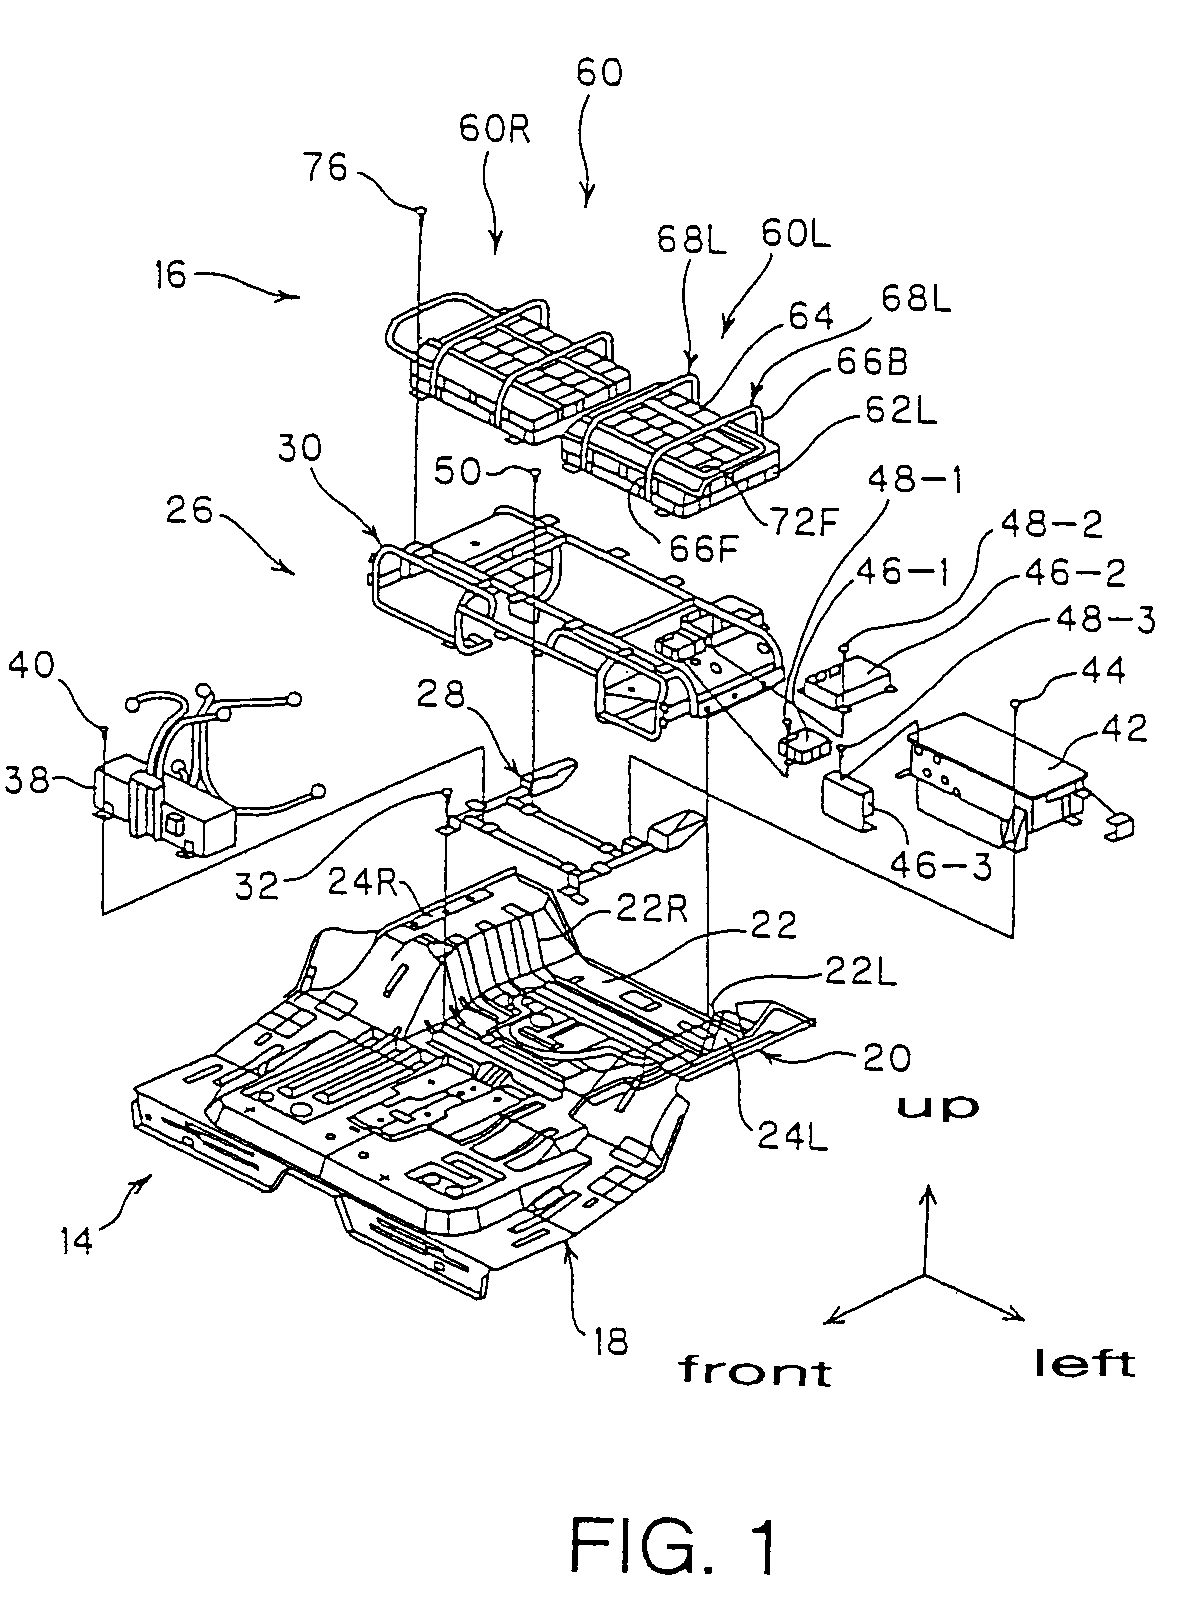 Apparatus for attaching electrical components to a vehicle